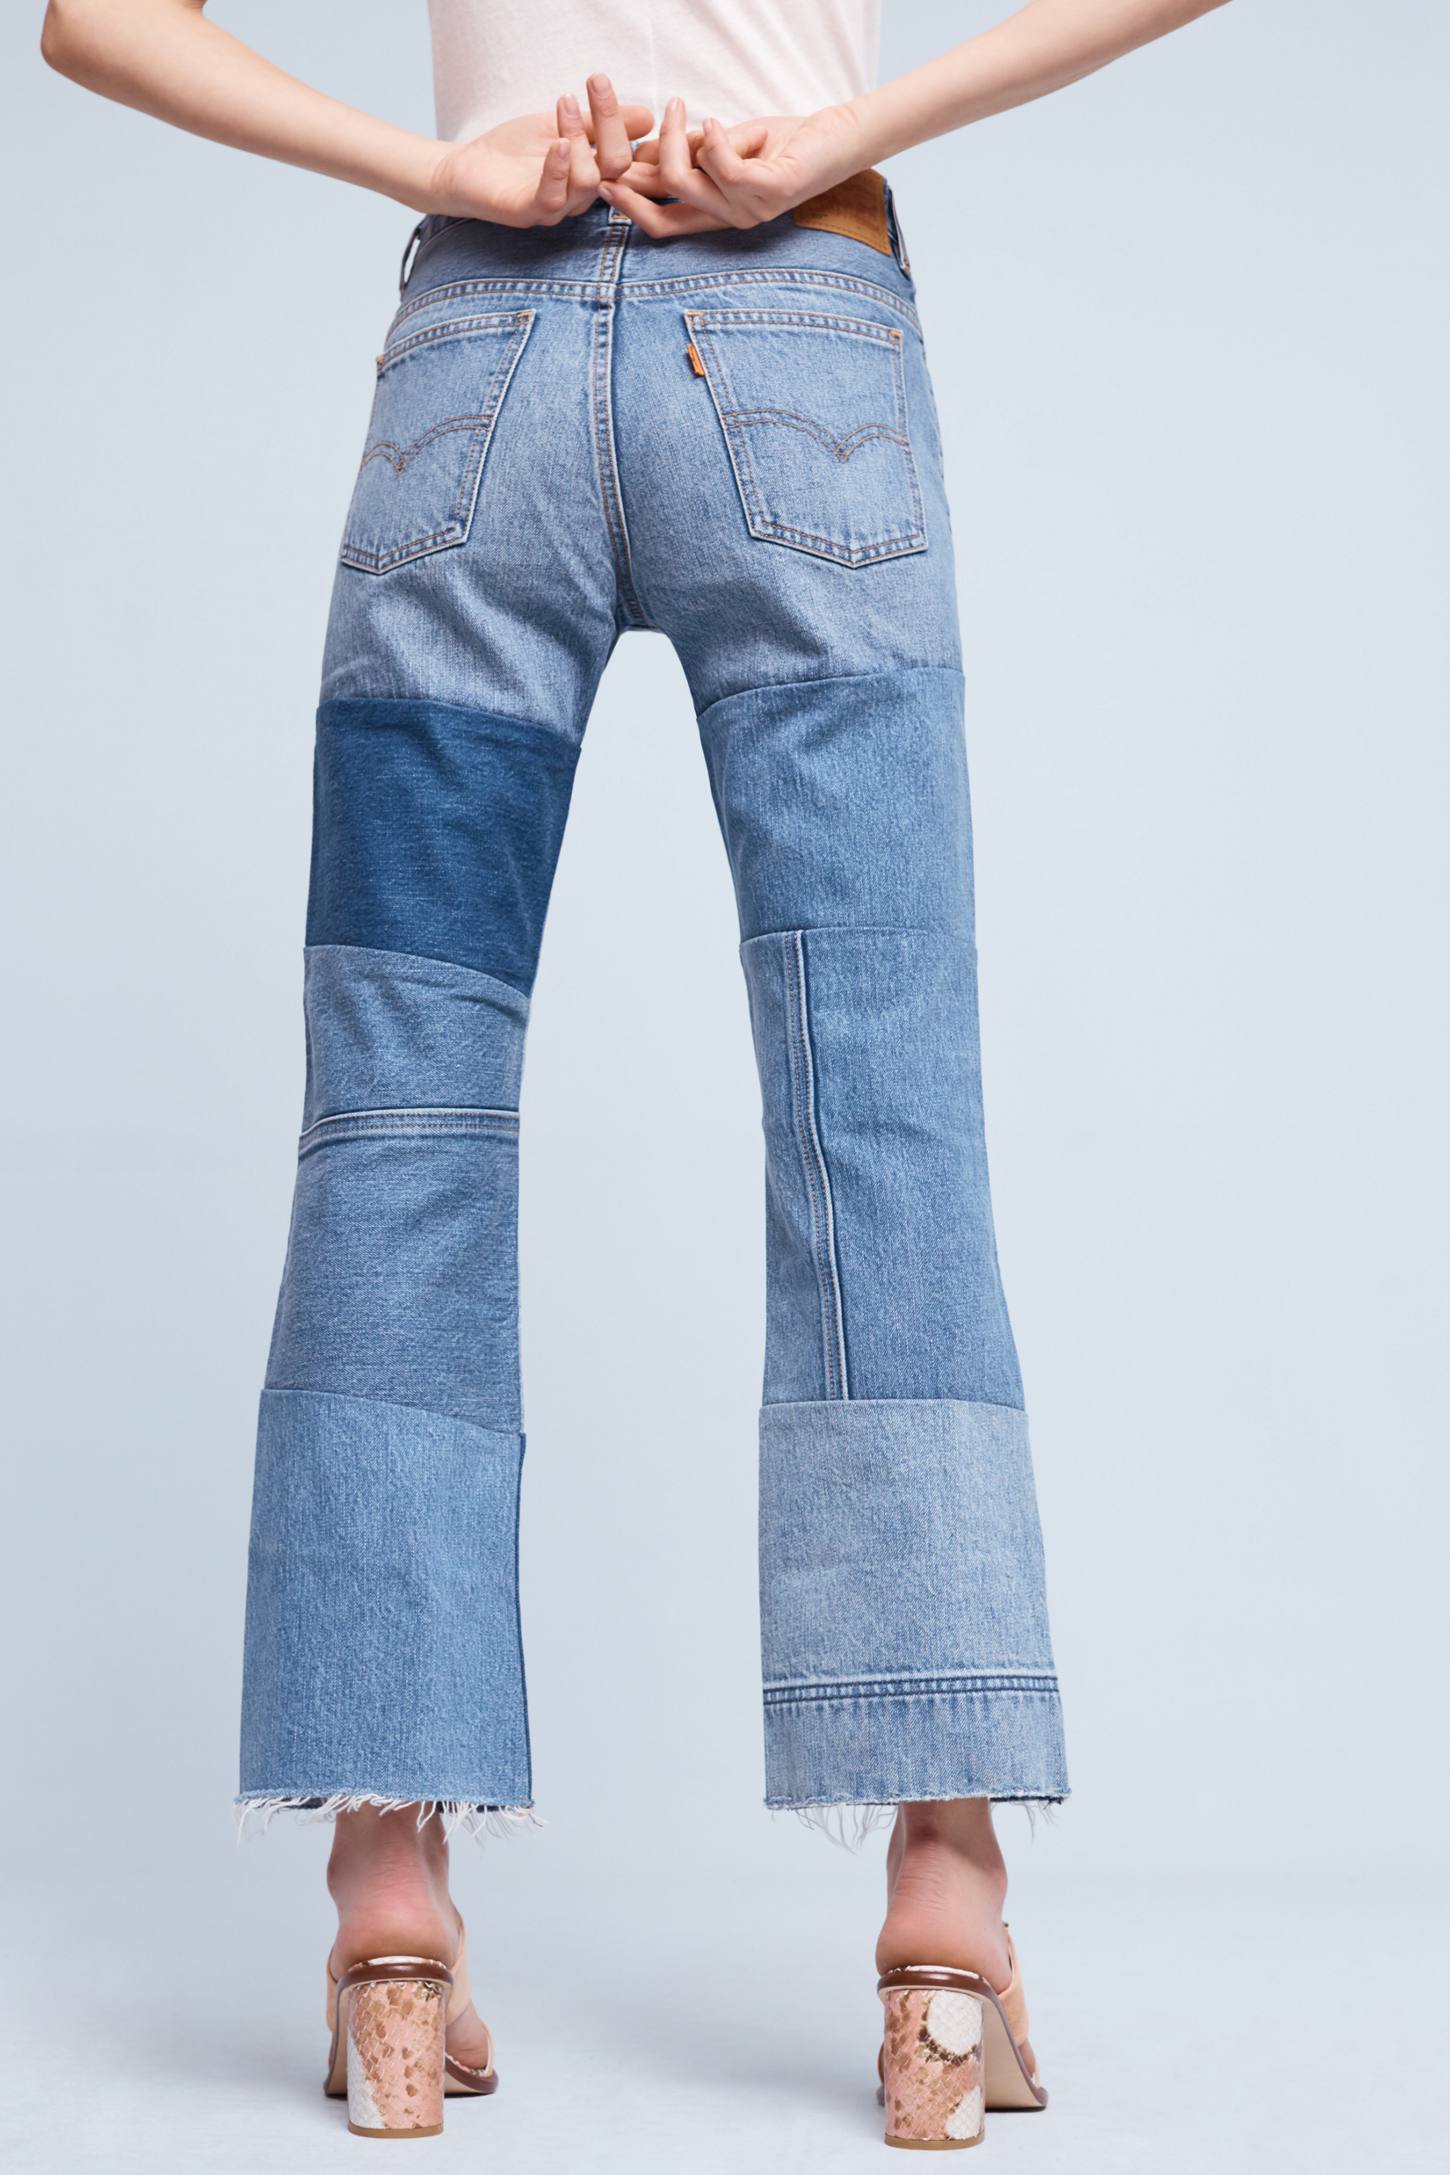 Levi's 517 Ultra High-Rise Cropped Bootcut Jeans | Anthropologie